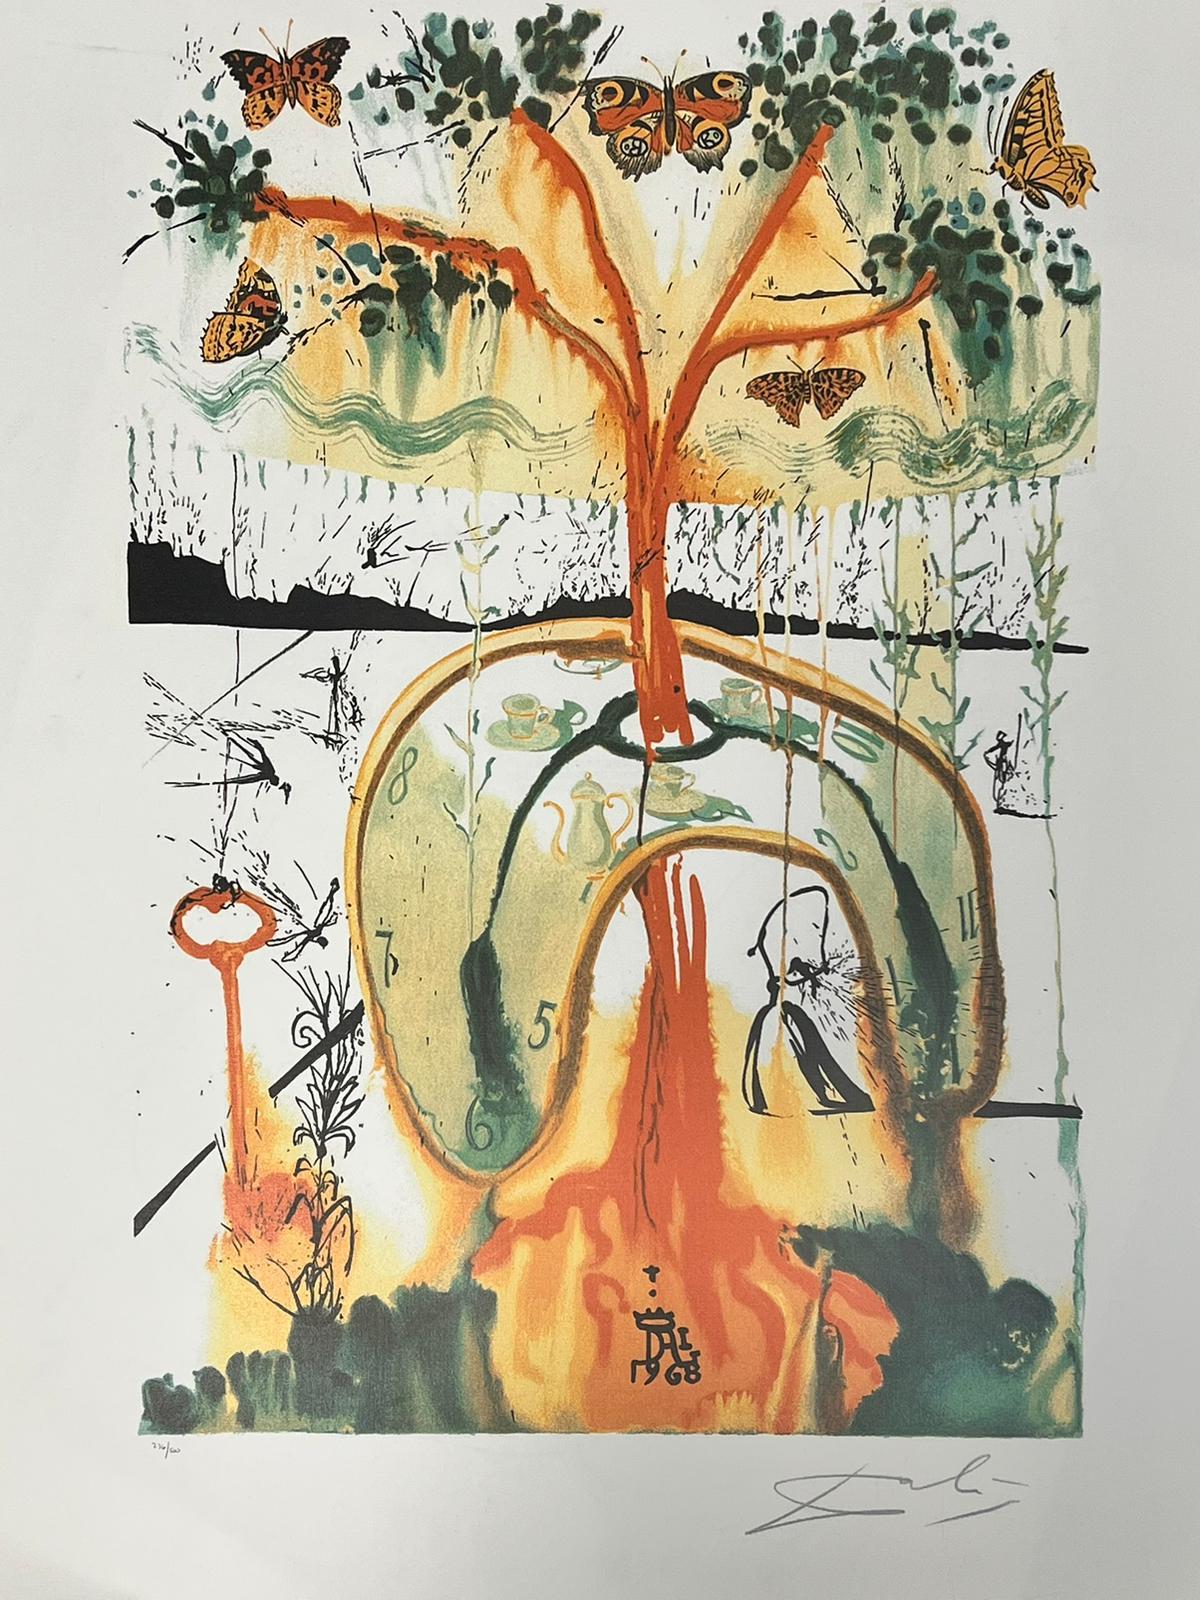 
After Salvador Dali (1904 - 1989)
limited edition colored lithograpg on thick paper, unframed
print: 29.5 x 21.5 inches
provenance: private collection, France
condition: very good and sound condition 
